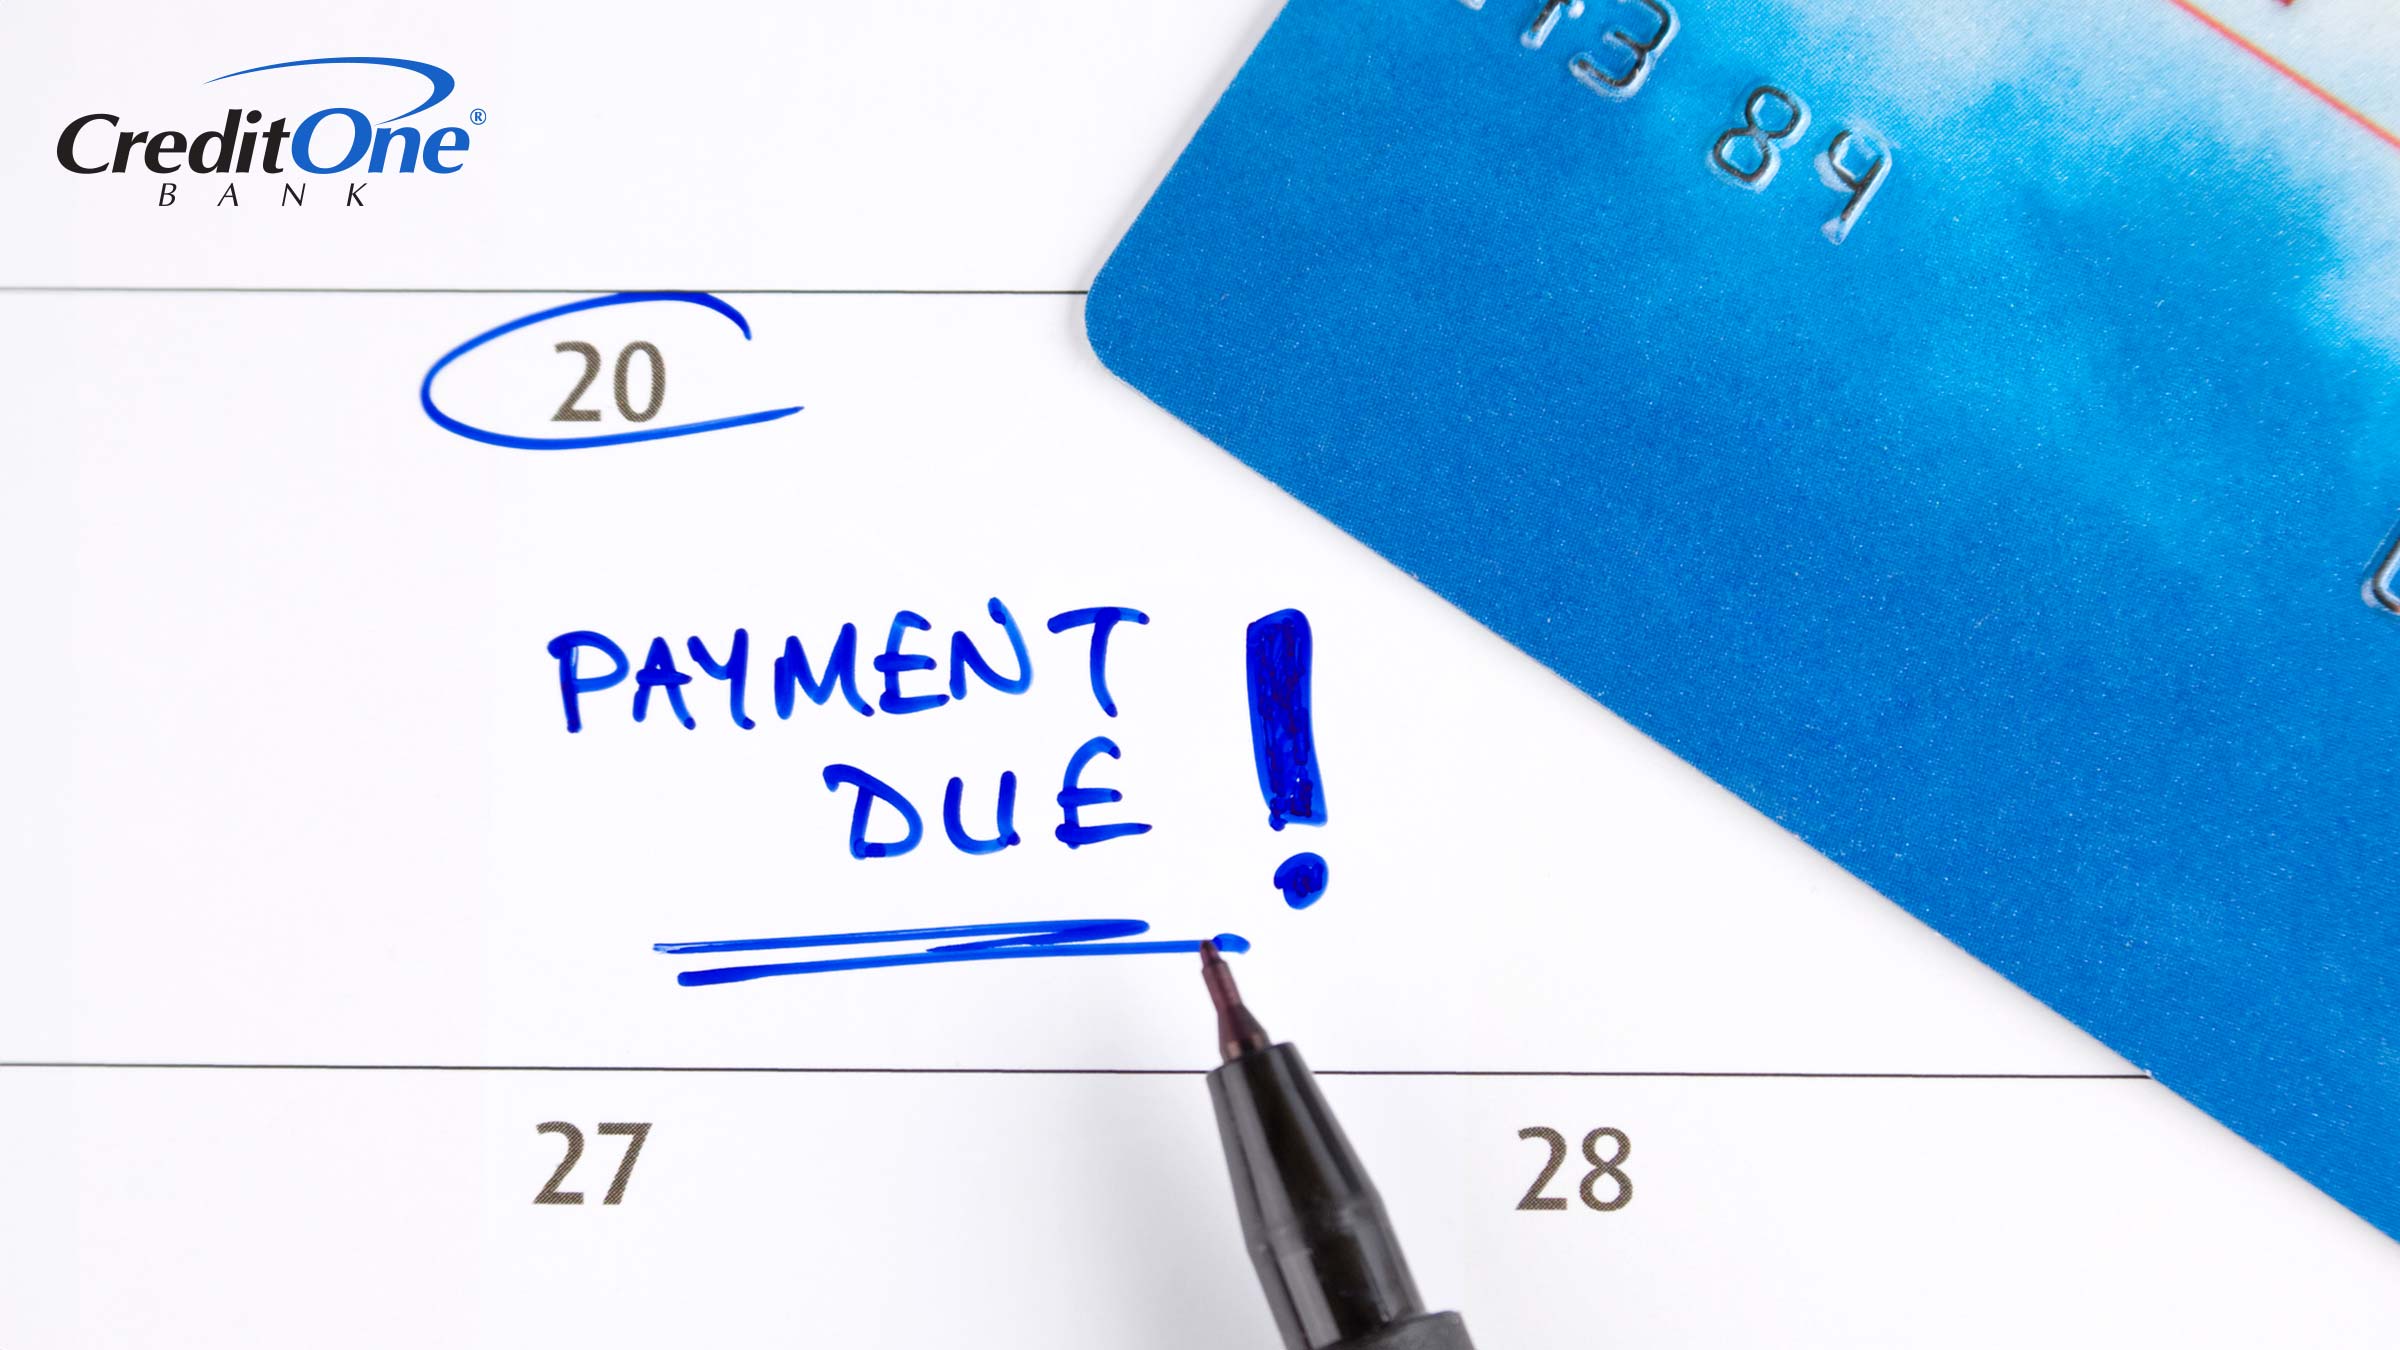 A credit card is shown on a calendar with a date circled and “Payment Due!” written down, showing that on-time payments have the biggest impact on credit scores.